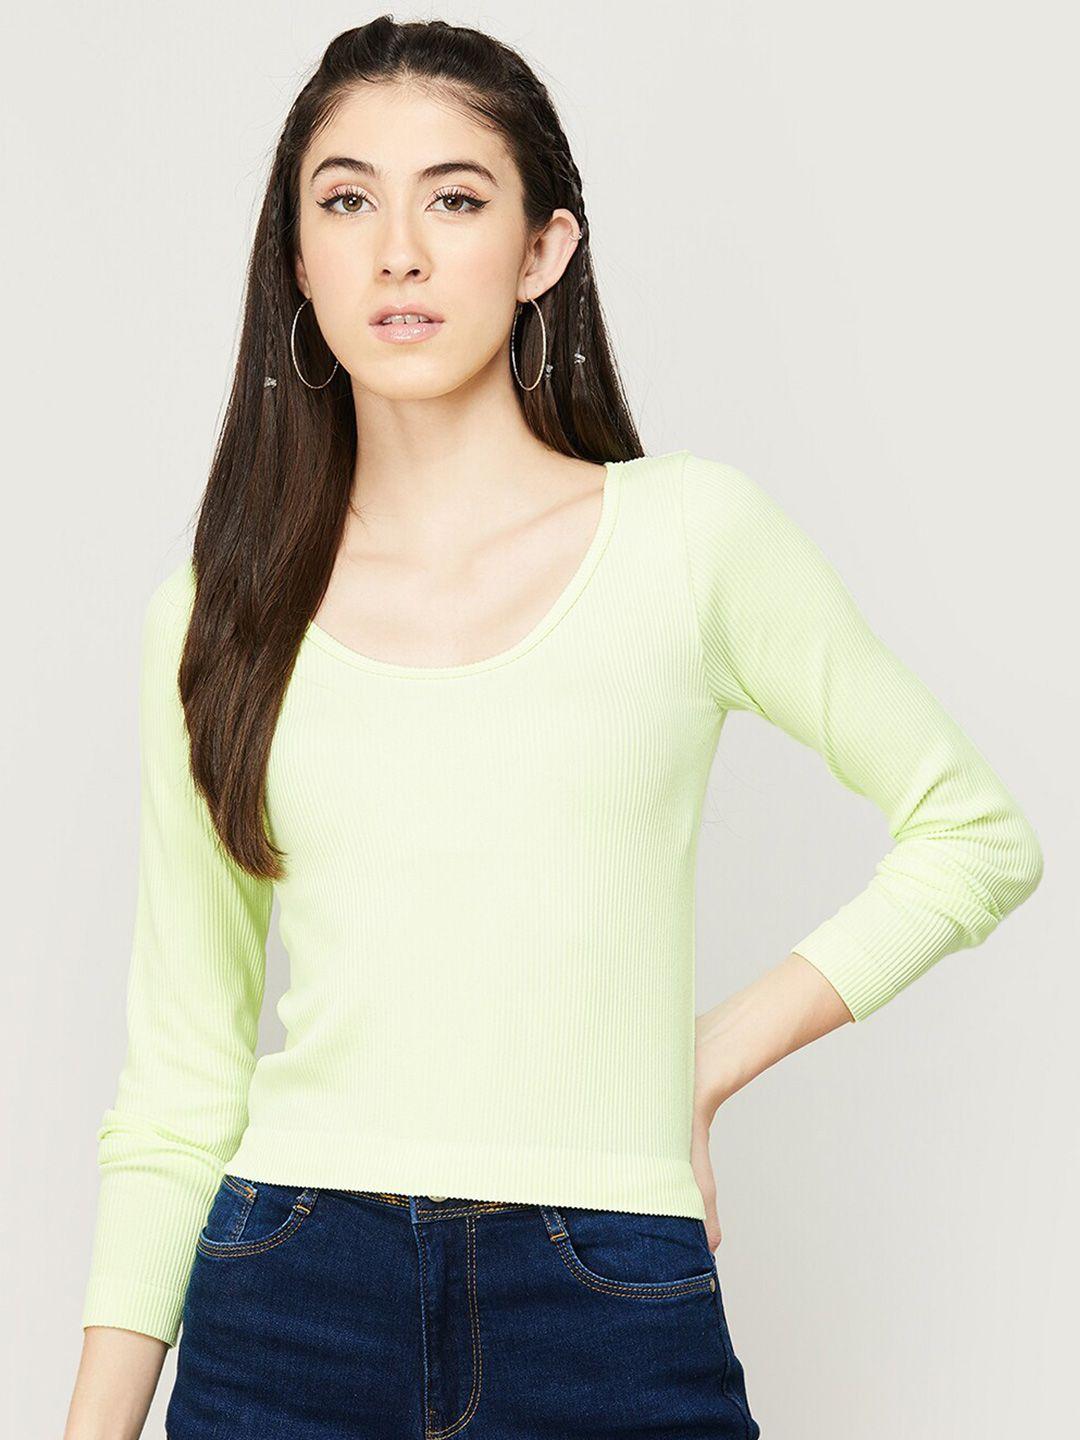 ginger-by-lifestyle-green-solid-nylon-top